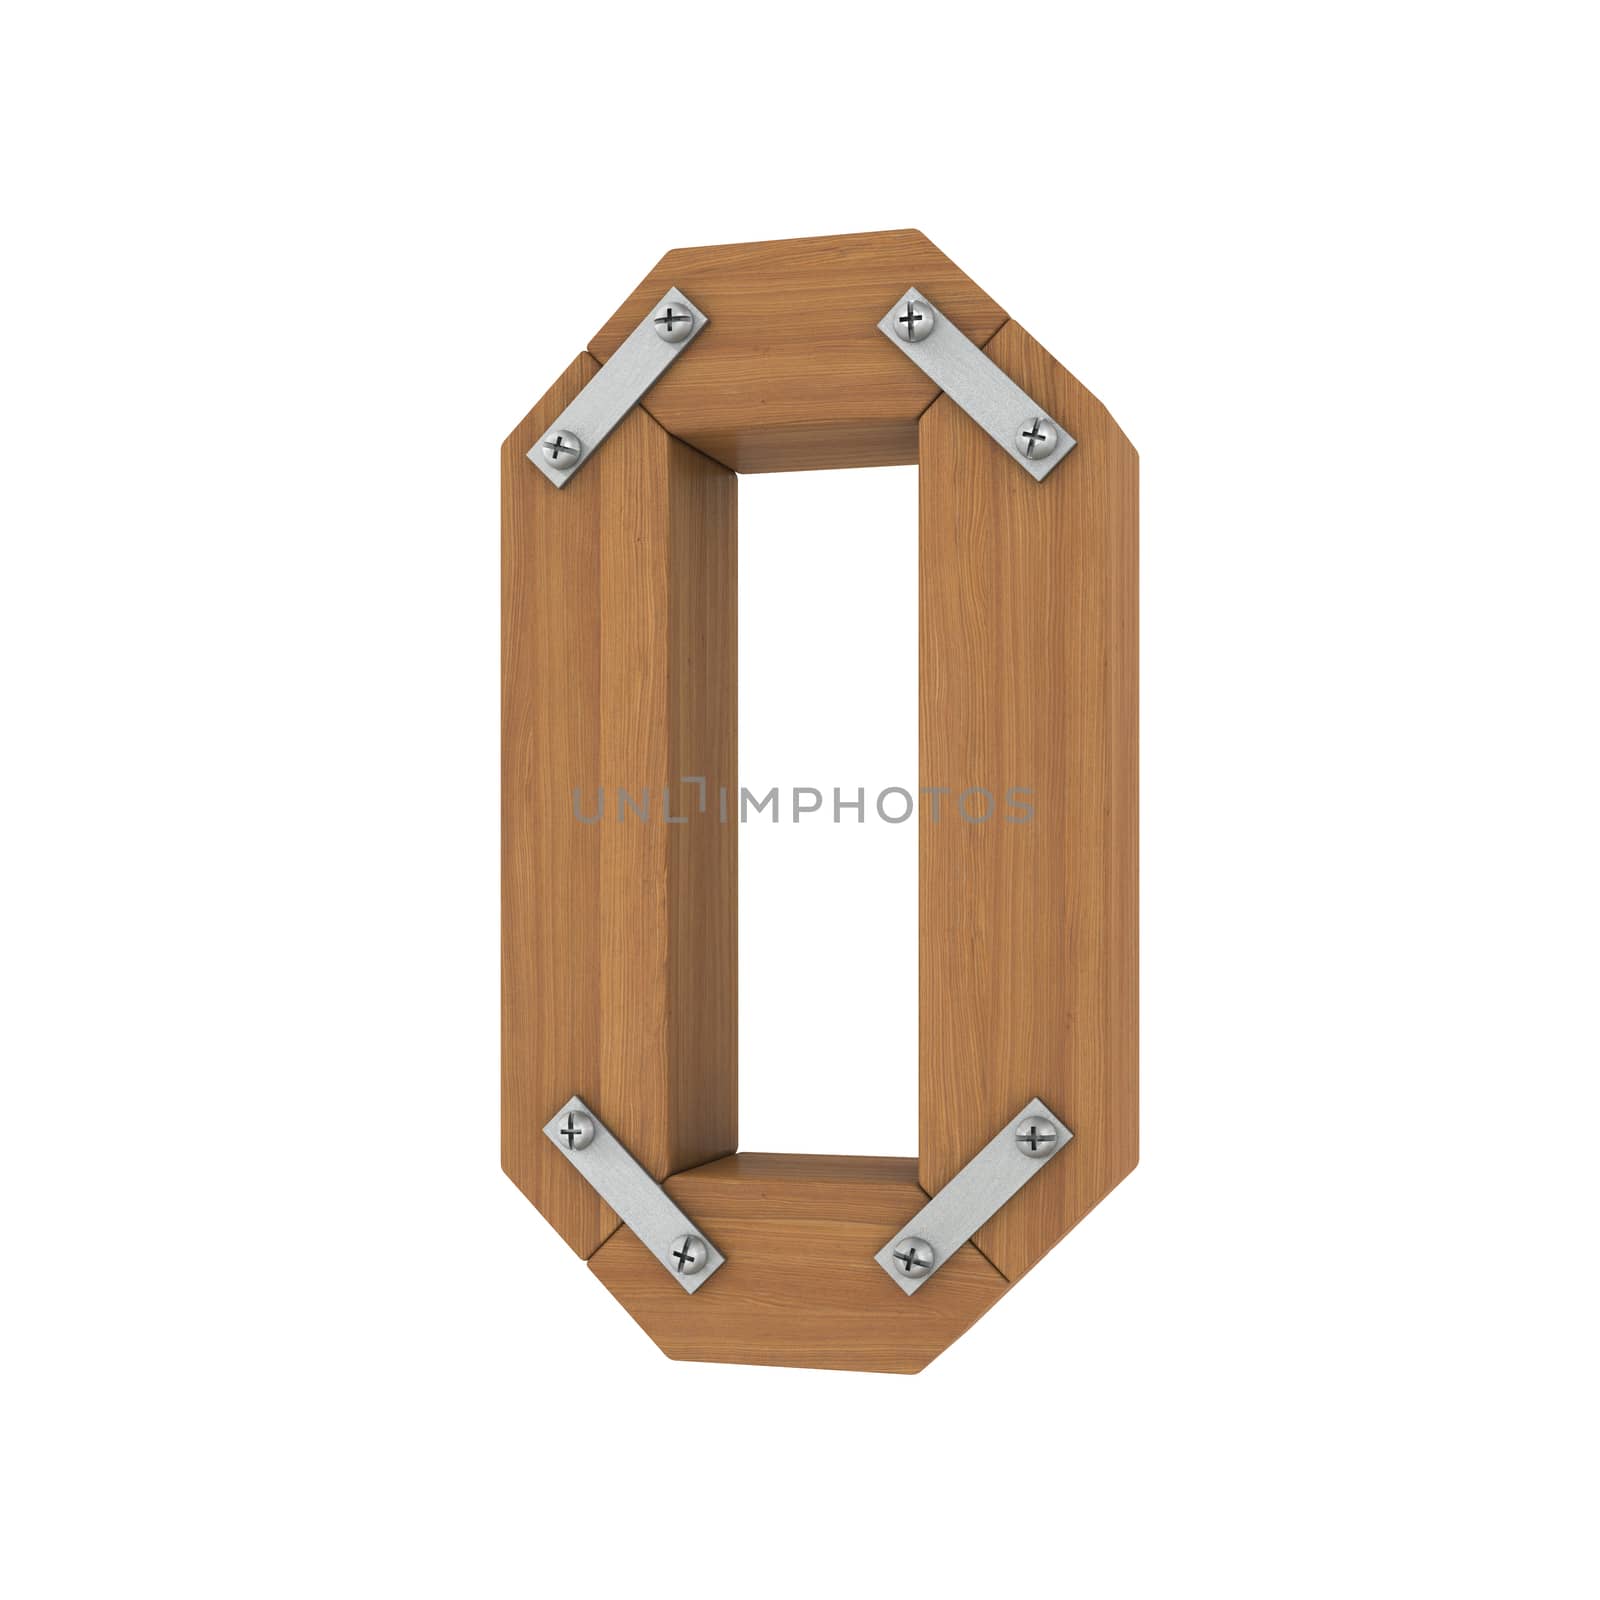 Wooden letter O. Isolated render on a white background